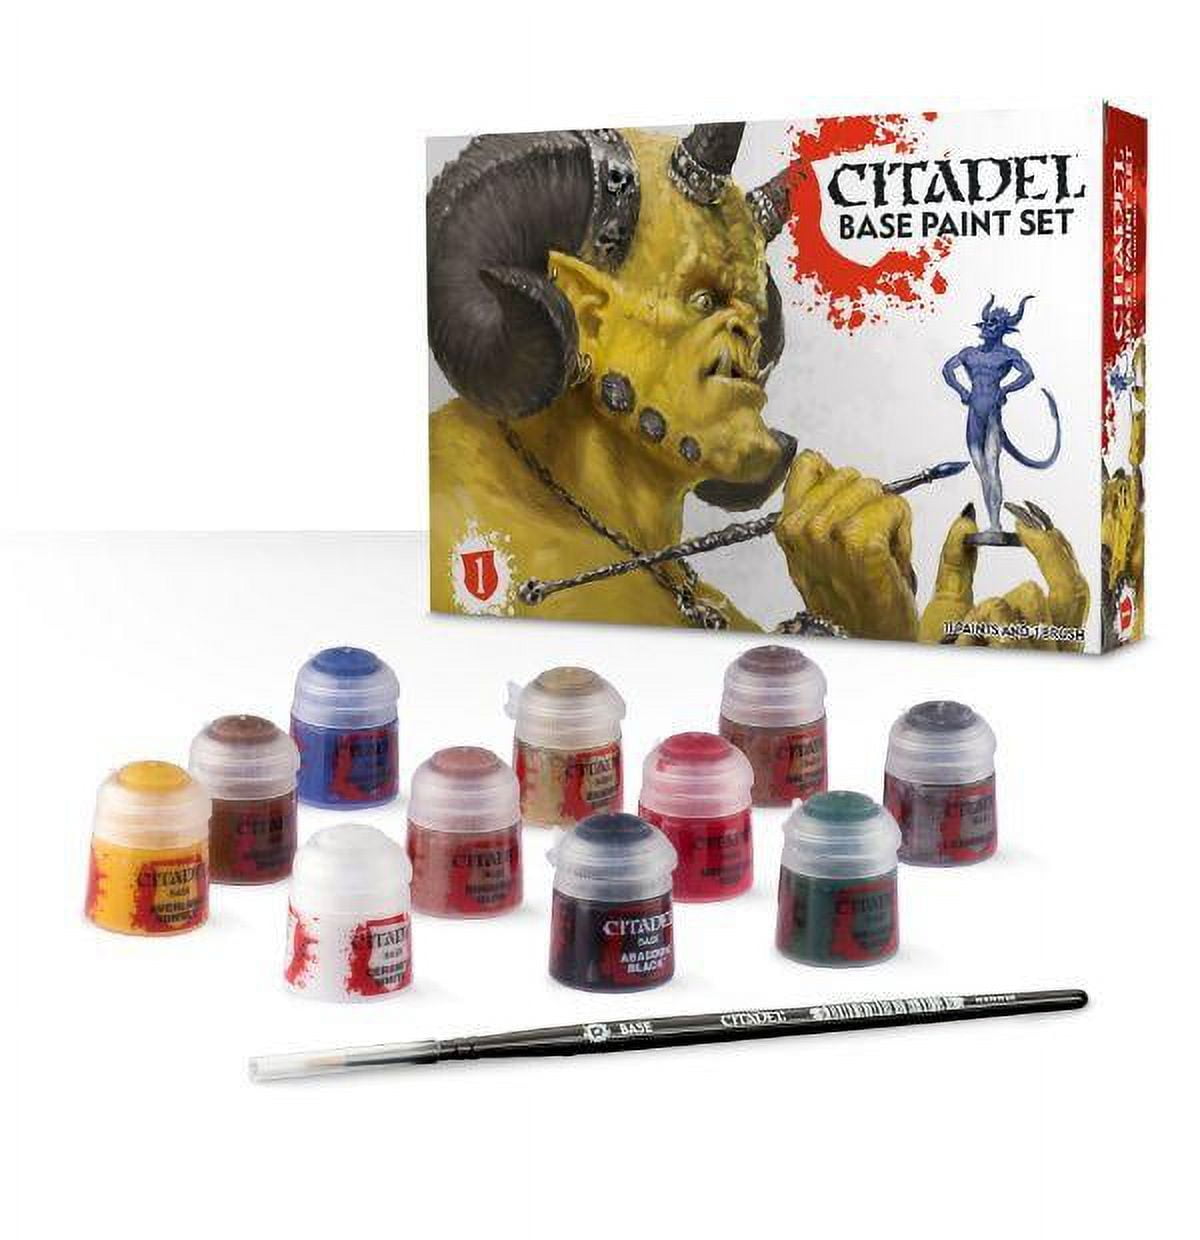  Citadel Choose-Your-Own Paint Set: Base, Shade, and Dry Paints  : Arts, Crafts & Sewing